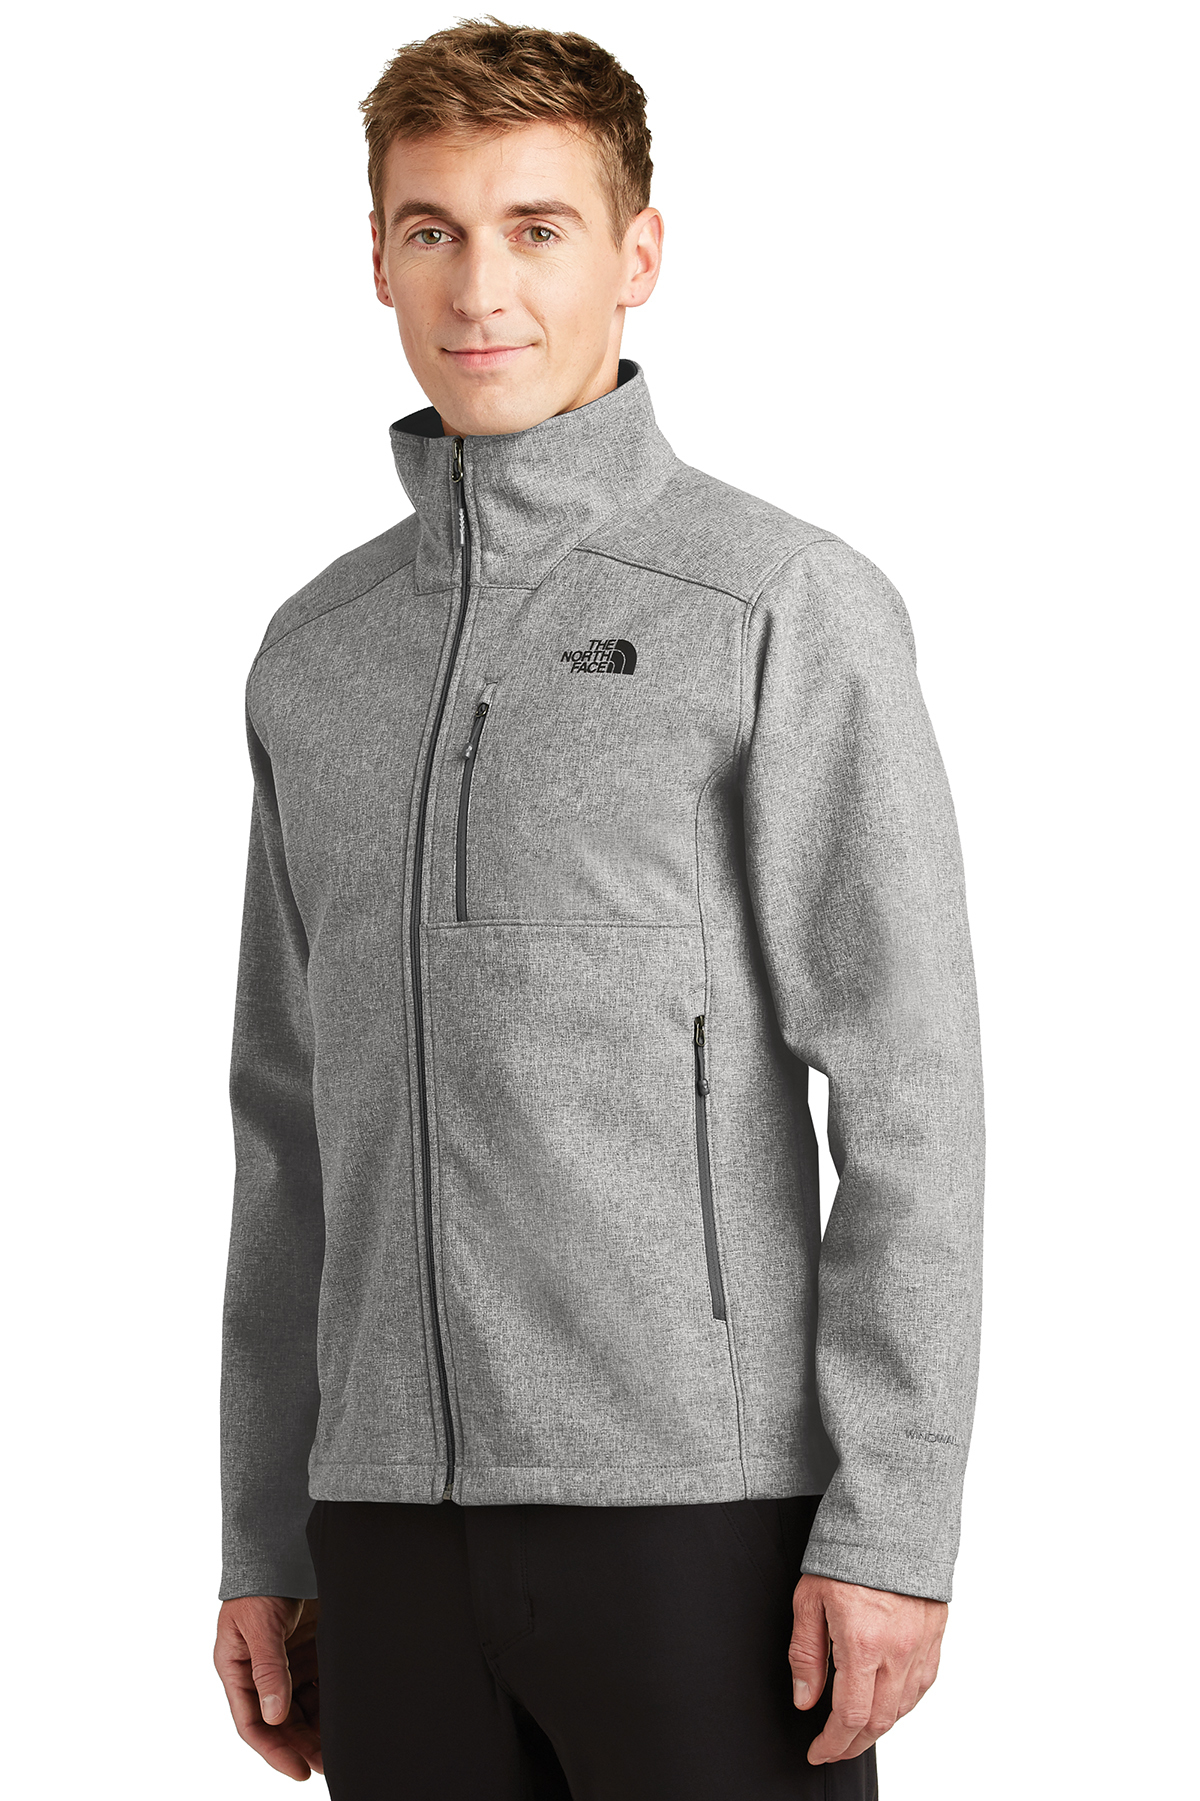 The North Face ® Apex Barrier Soft Shell Jacket | Product | Company Casuals